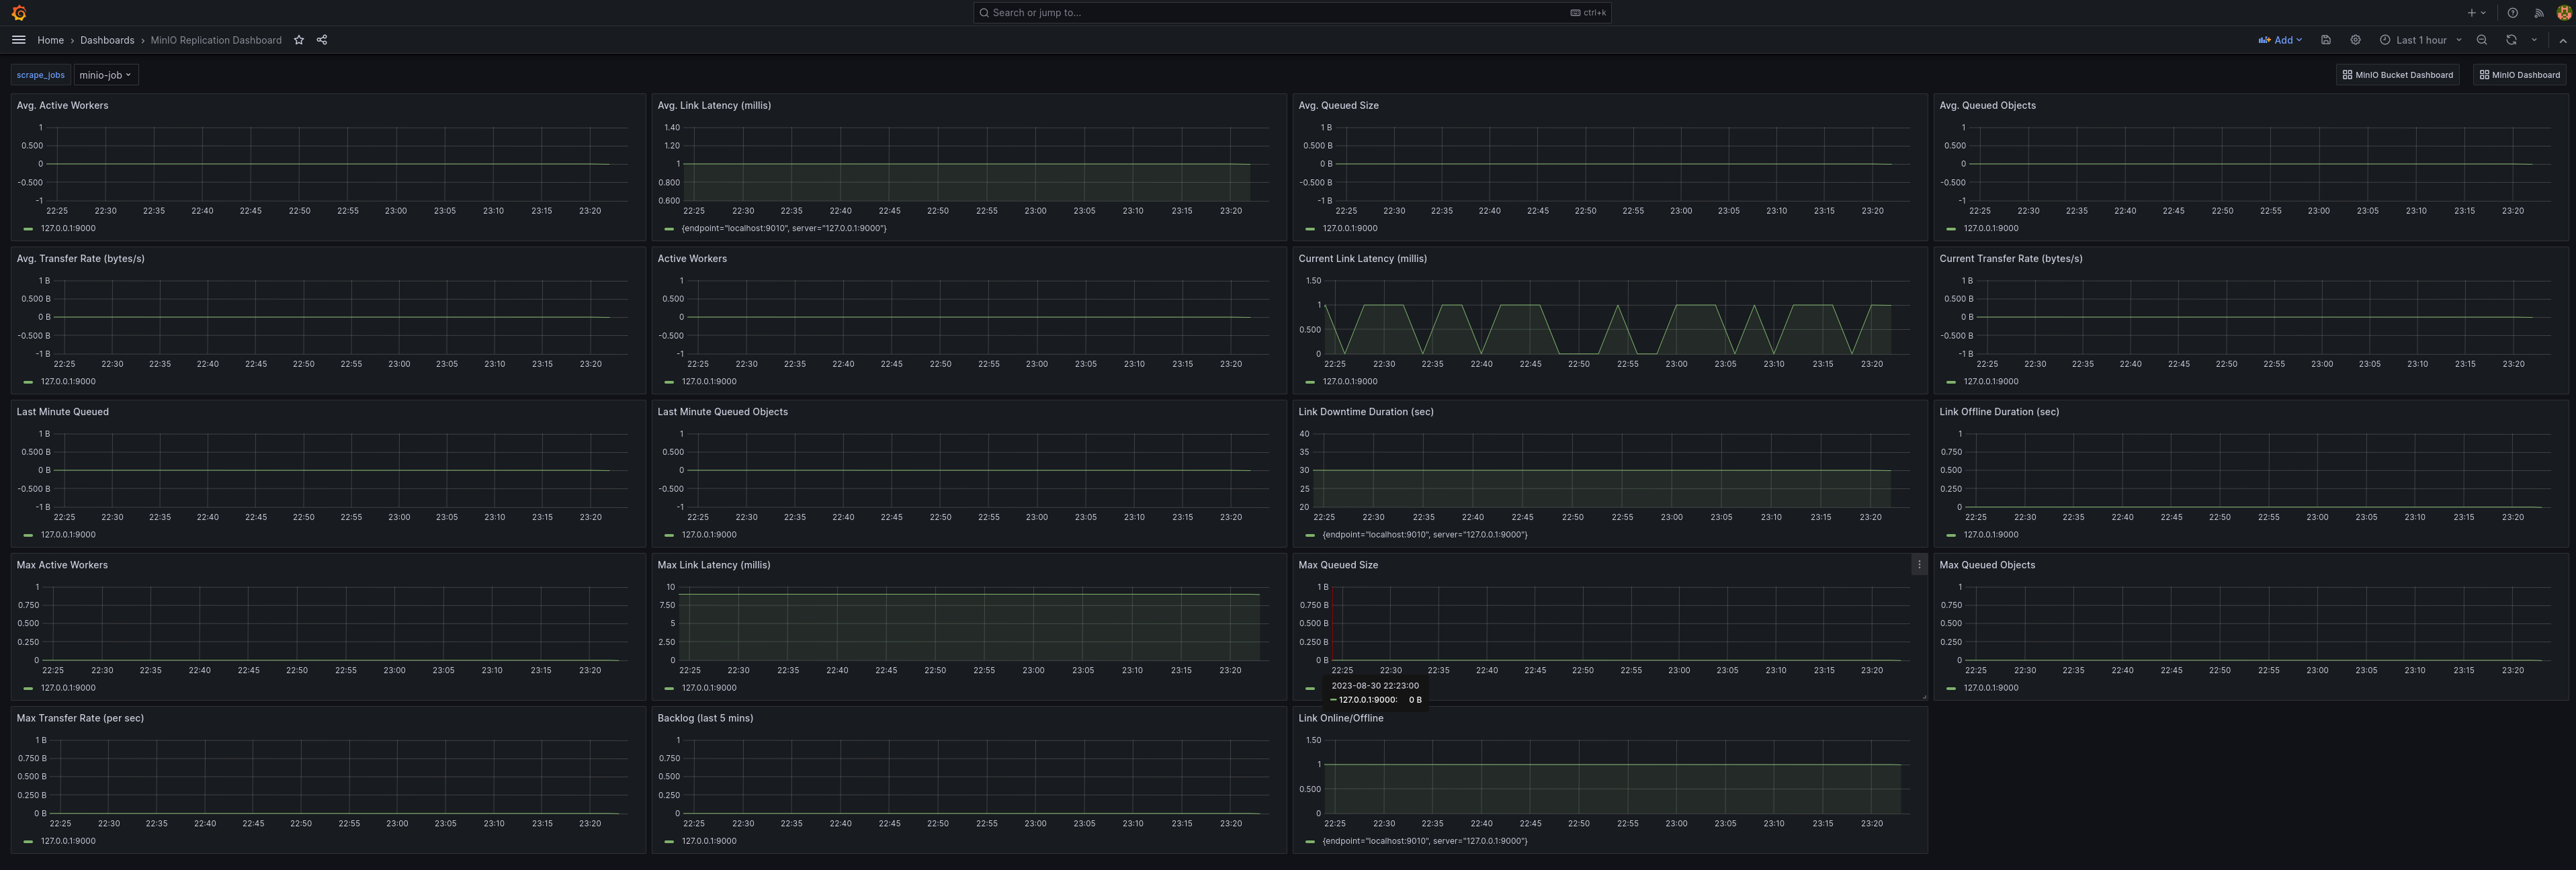 A sample of the MinIO Grafana dashboard showing many different captured metrics for cluster replication.